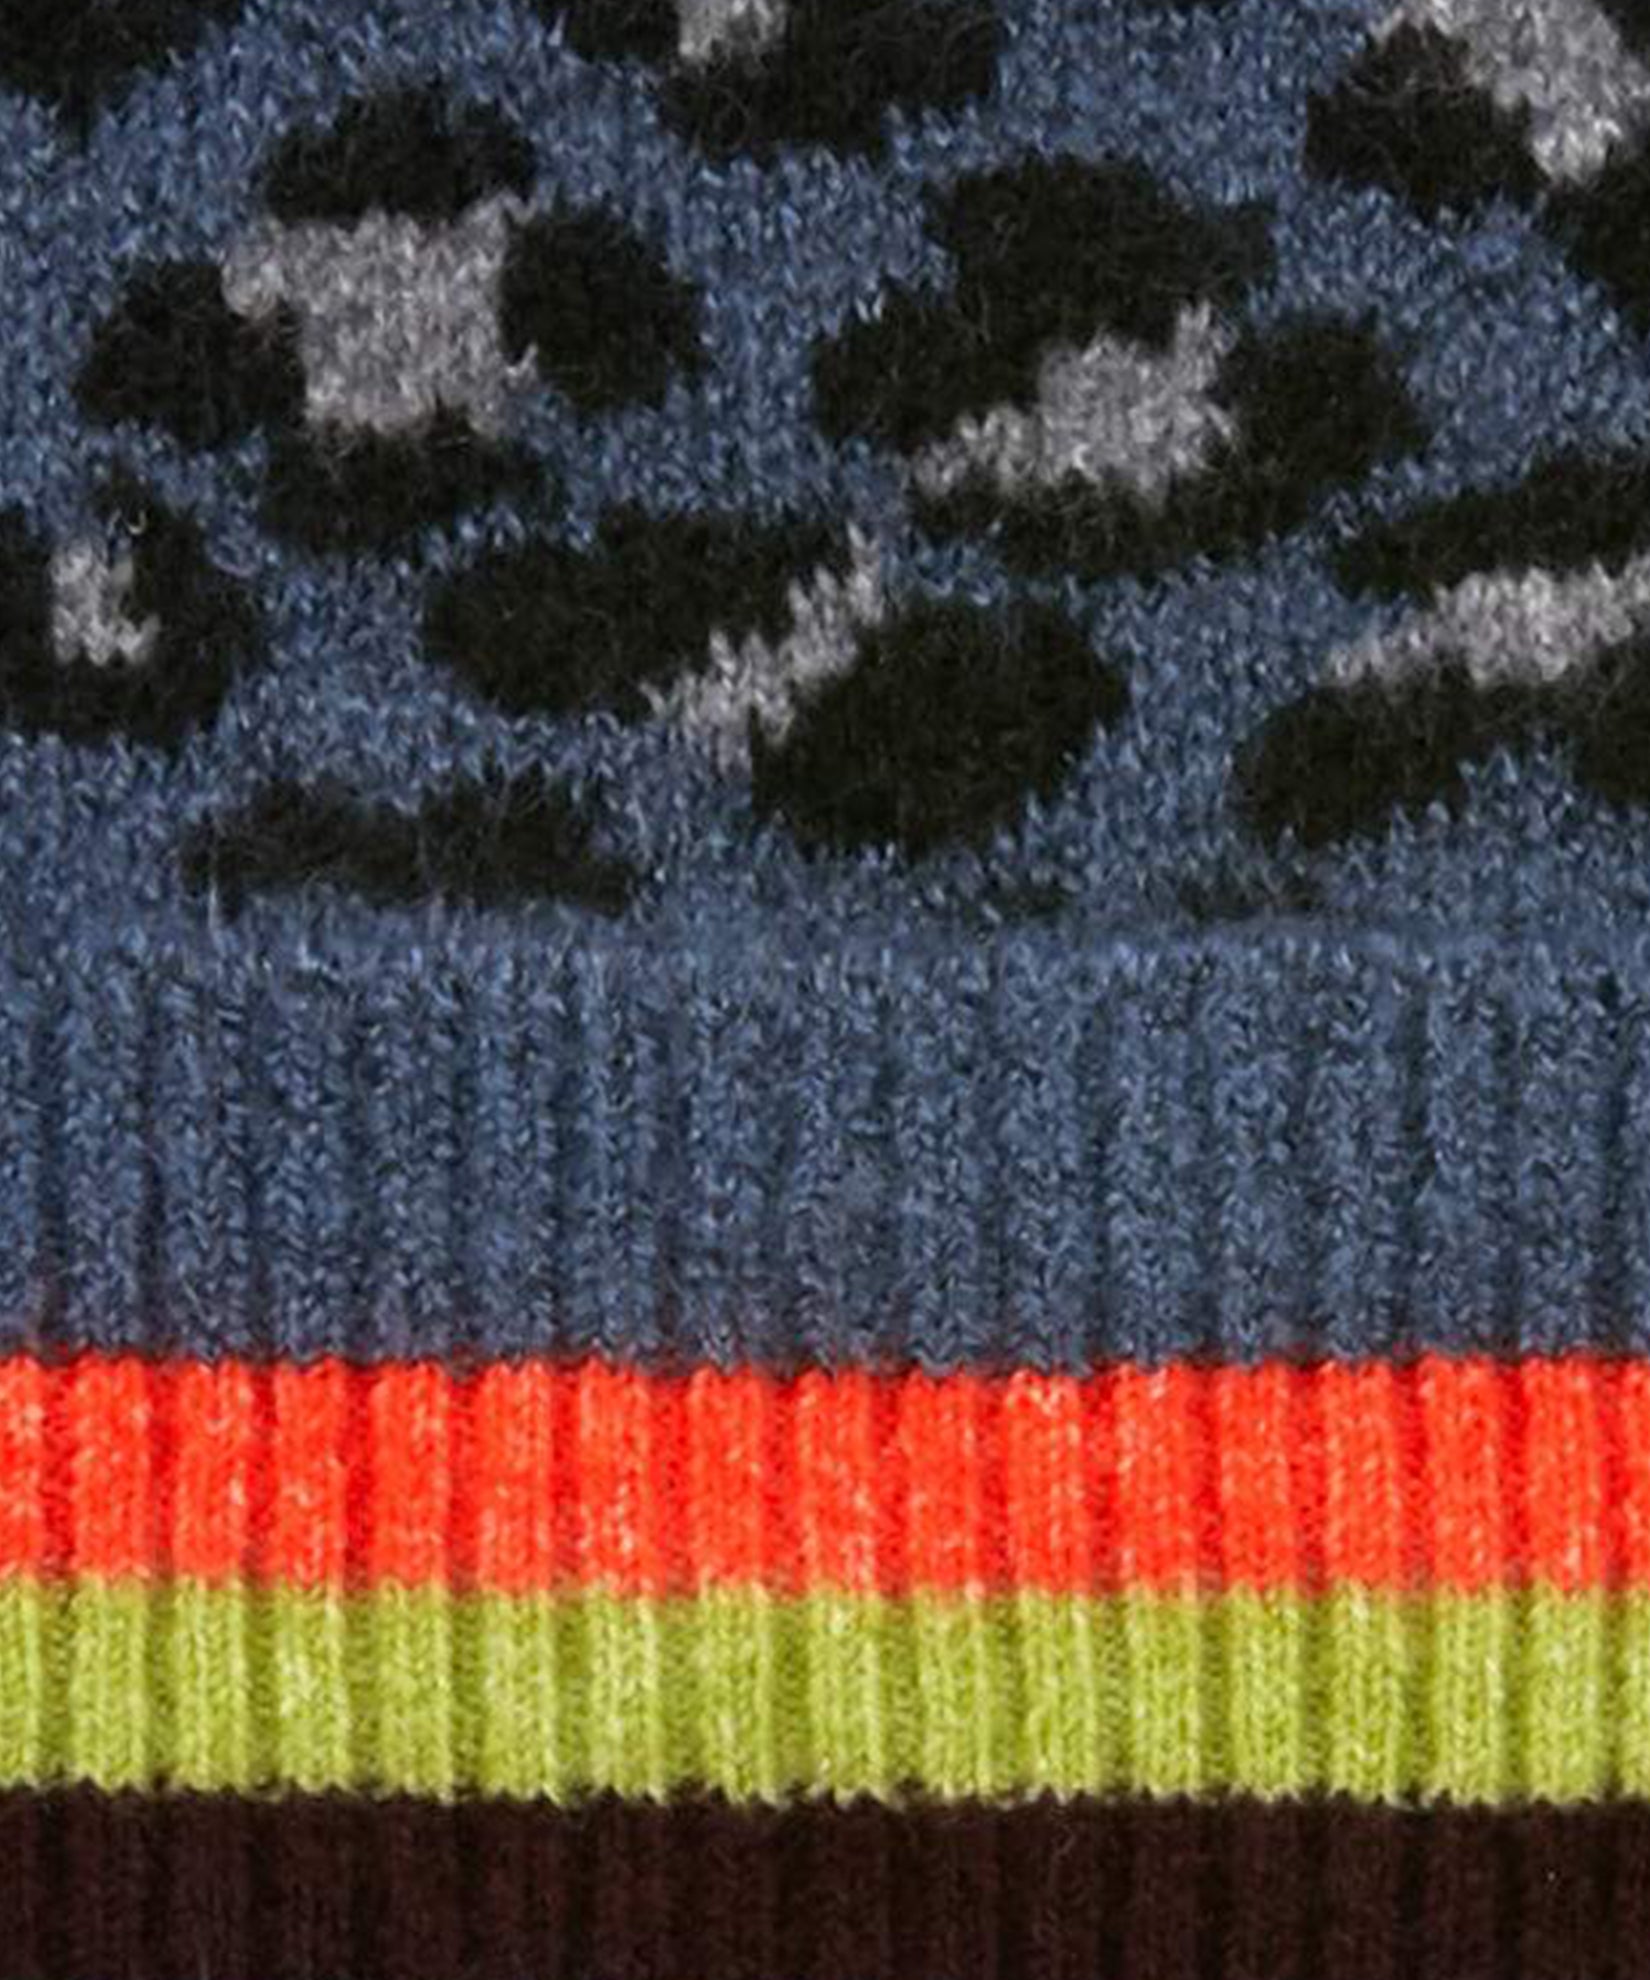 Happy Cat Beanie in color Storm Blue